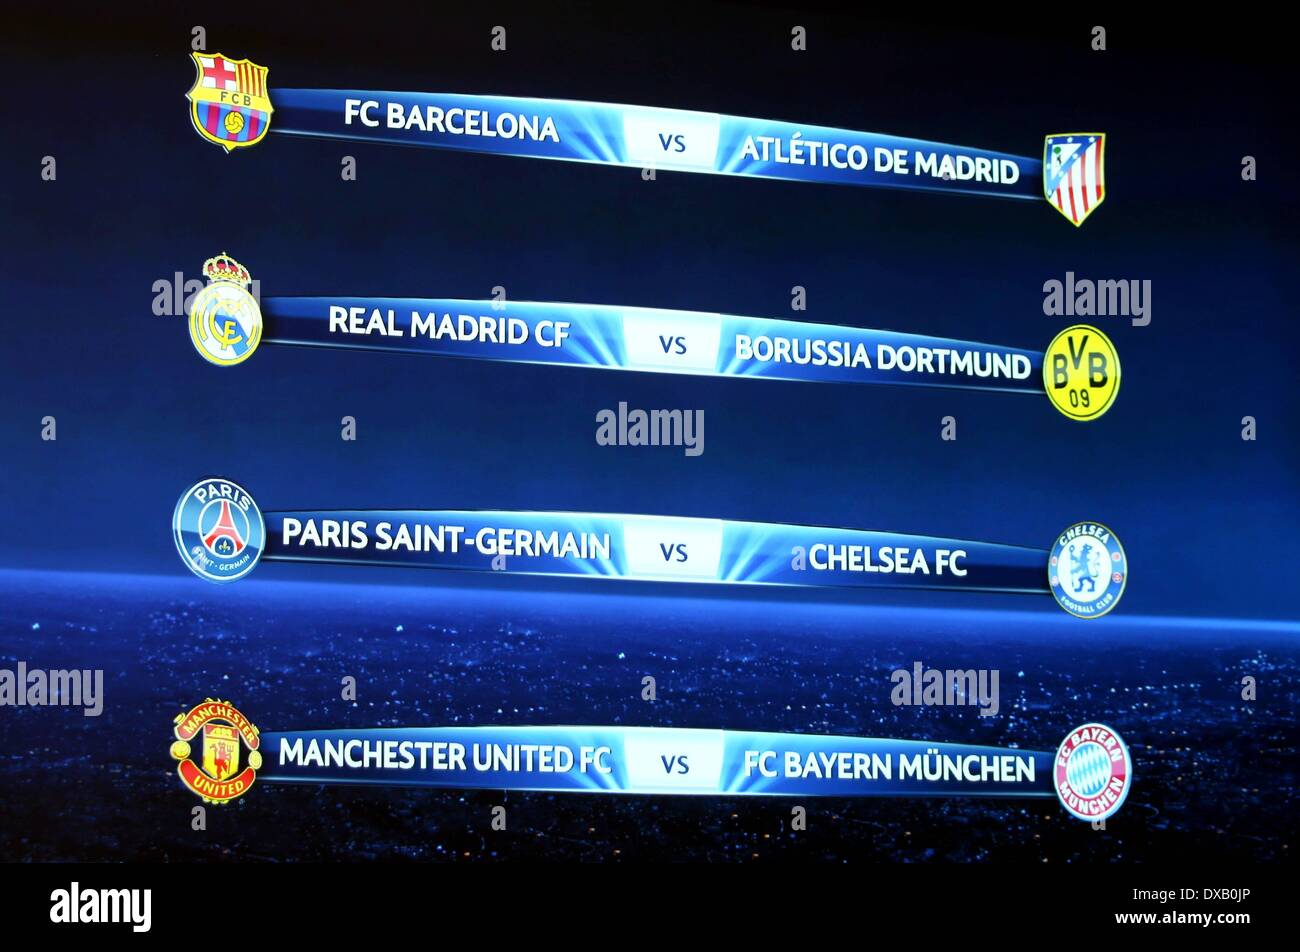 Nyon, Switzerland. 21st Mar, 2014. Champions League quarterfinal draw. The  final drawing is shown on the display board Credit: Action Plus  Sports/Alamy Live News Stock Photo - Alamy